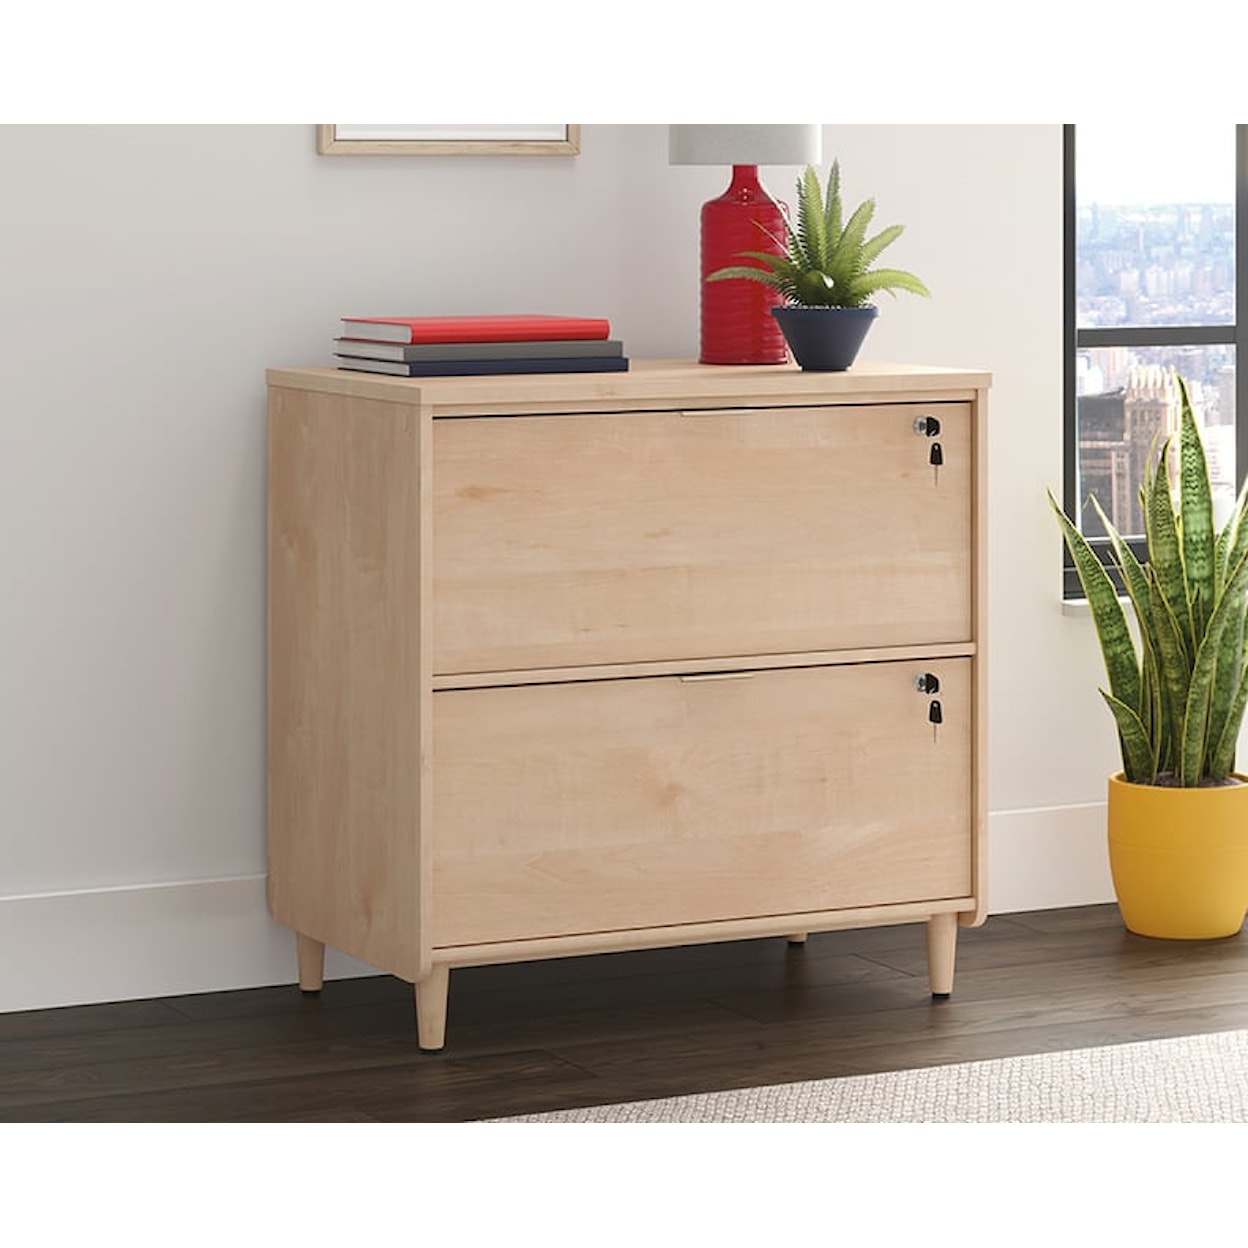 Sauder Clifford Place 2-Drawer Lateral File Cabinet